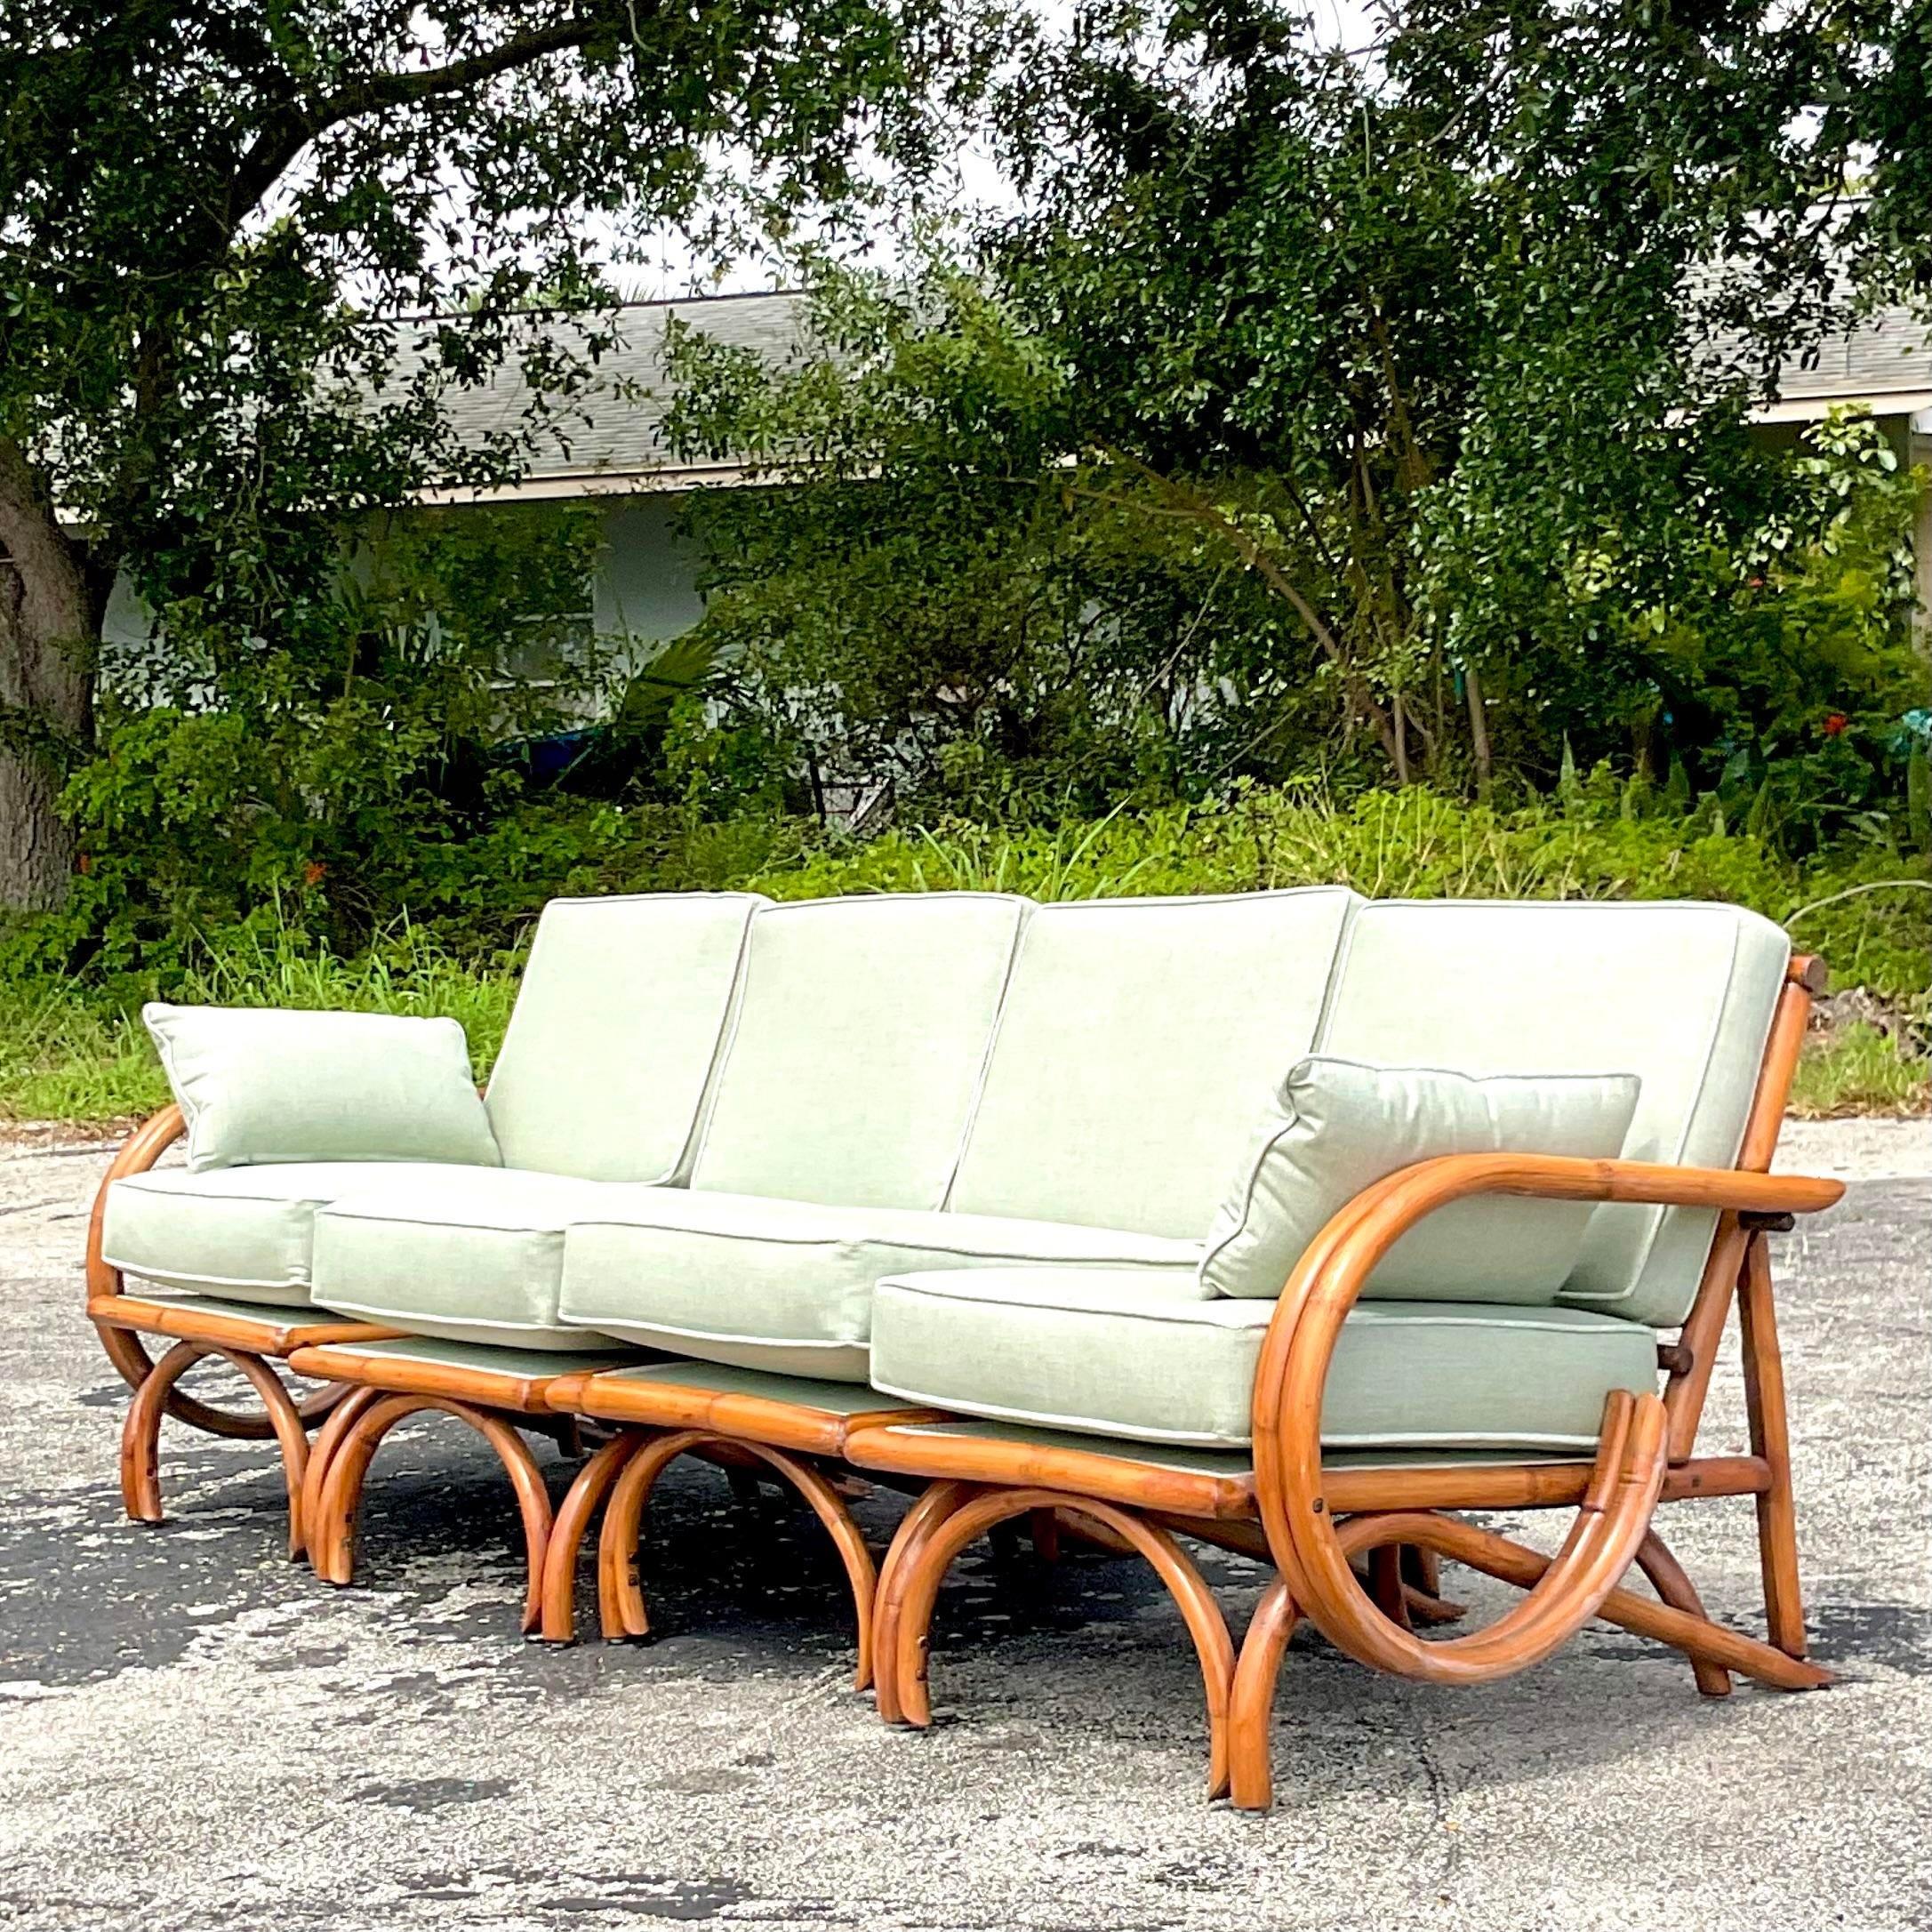 A fantastic vintage Coastal four seat sofa. Chic bent rattan with loop sides and a high back. Fully restored with a complete rattan makeover and all new Sunbrella upholstery with the Krypton treatment for protection. Acquired from a Palm Beach